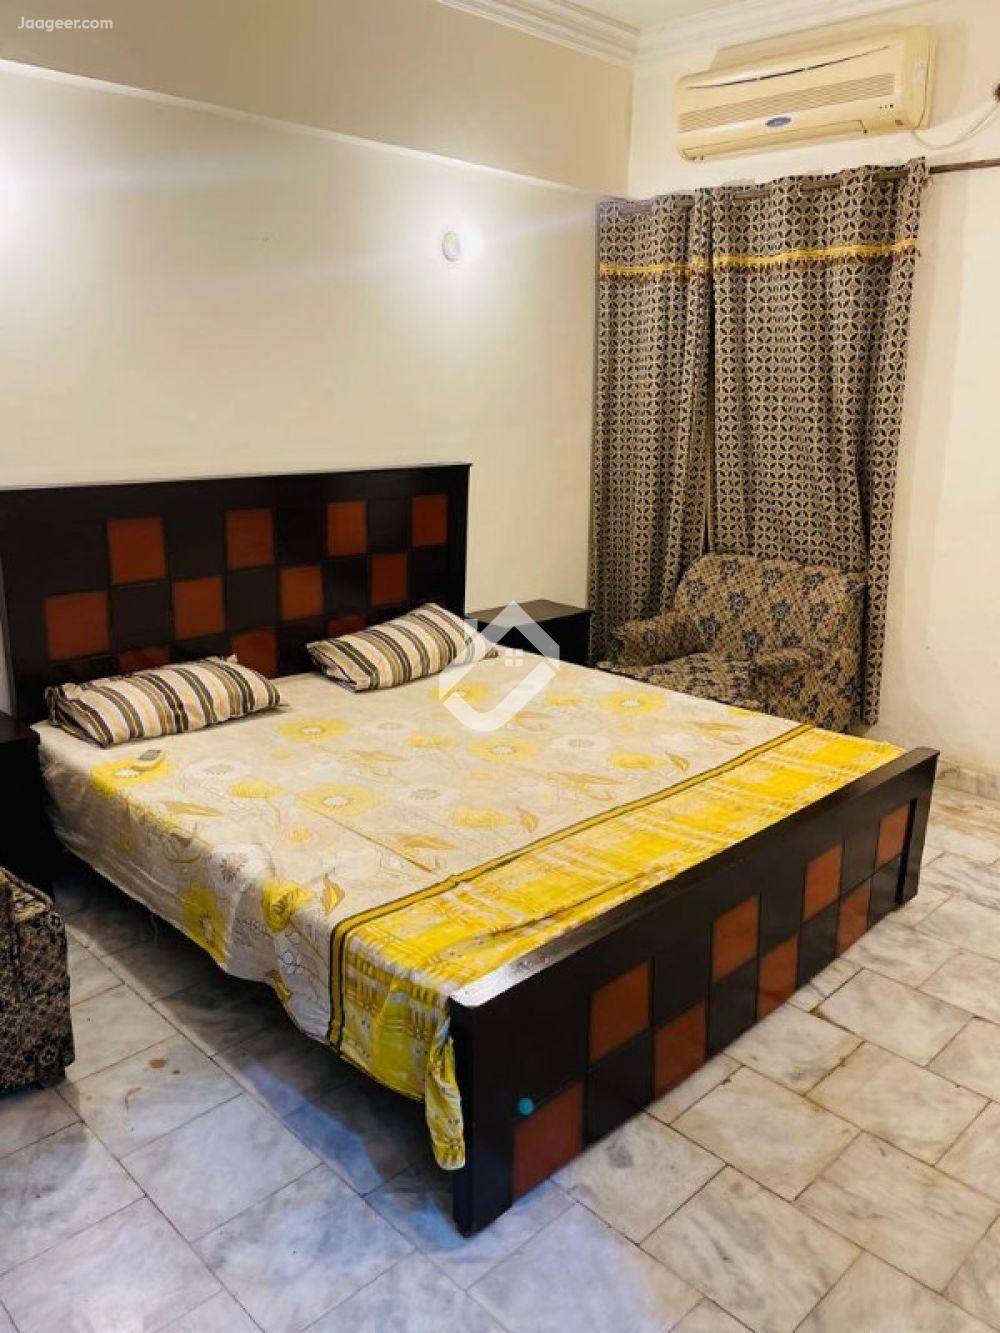 View  3 Bed Furnished Apartment For Rent In Khudadad Heights  in Khudadad Heights E-11, Islamabad